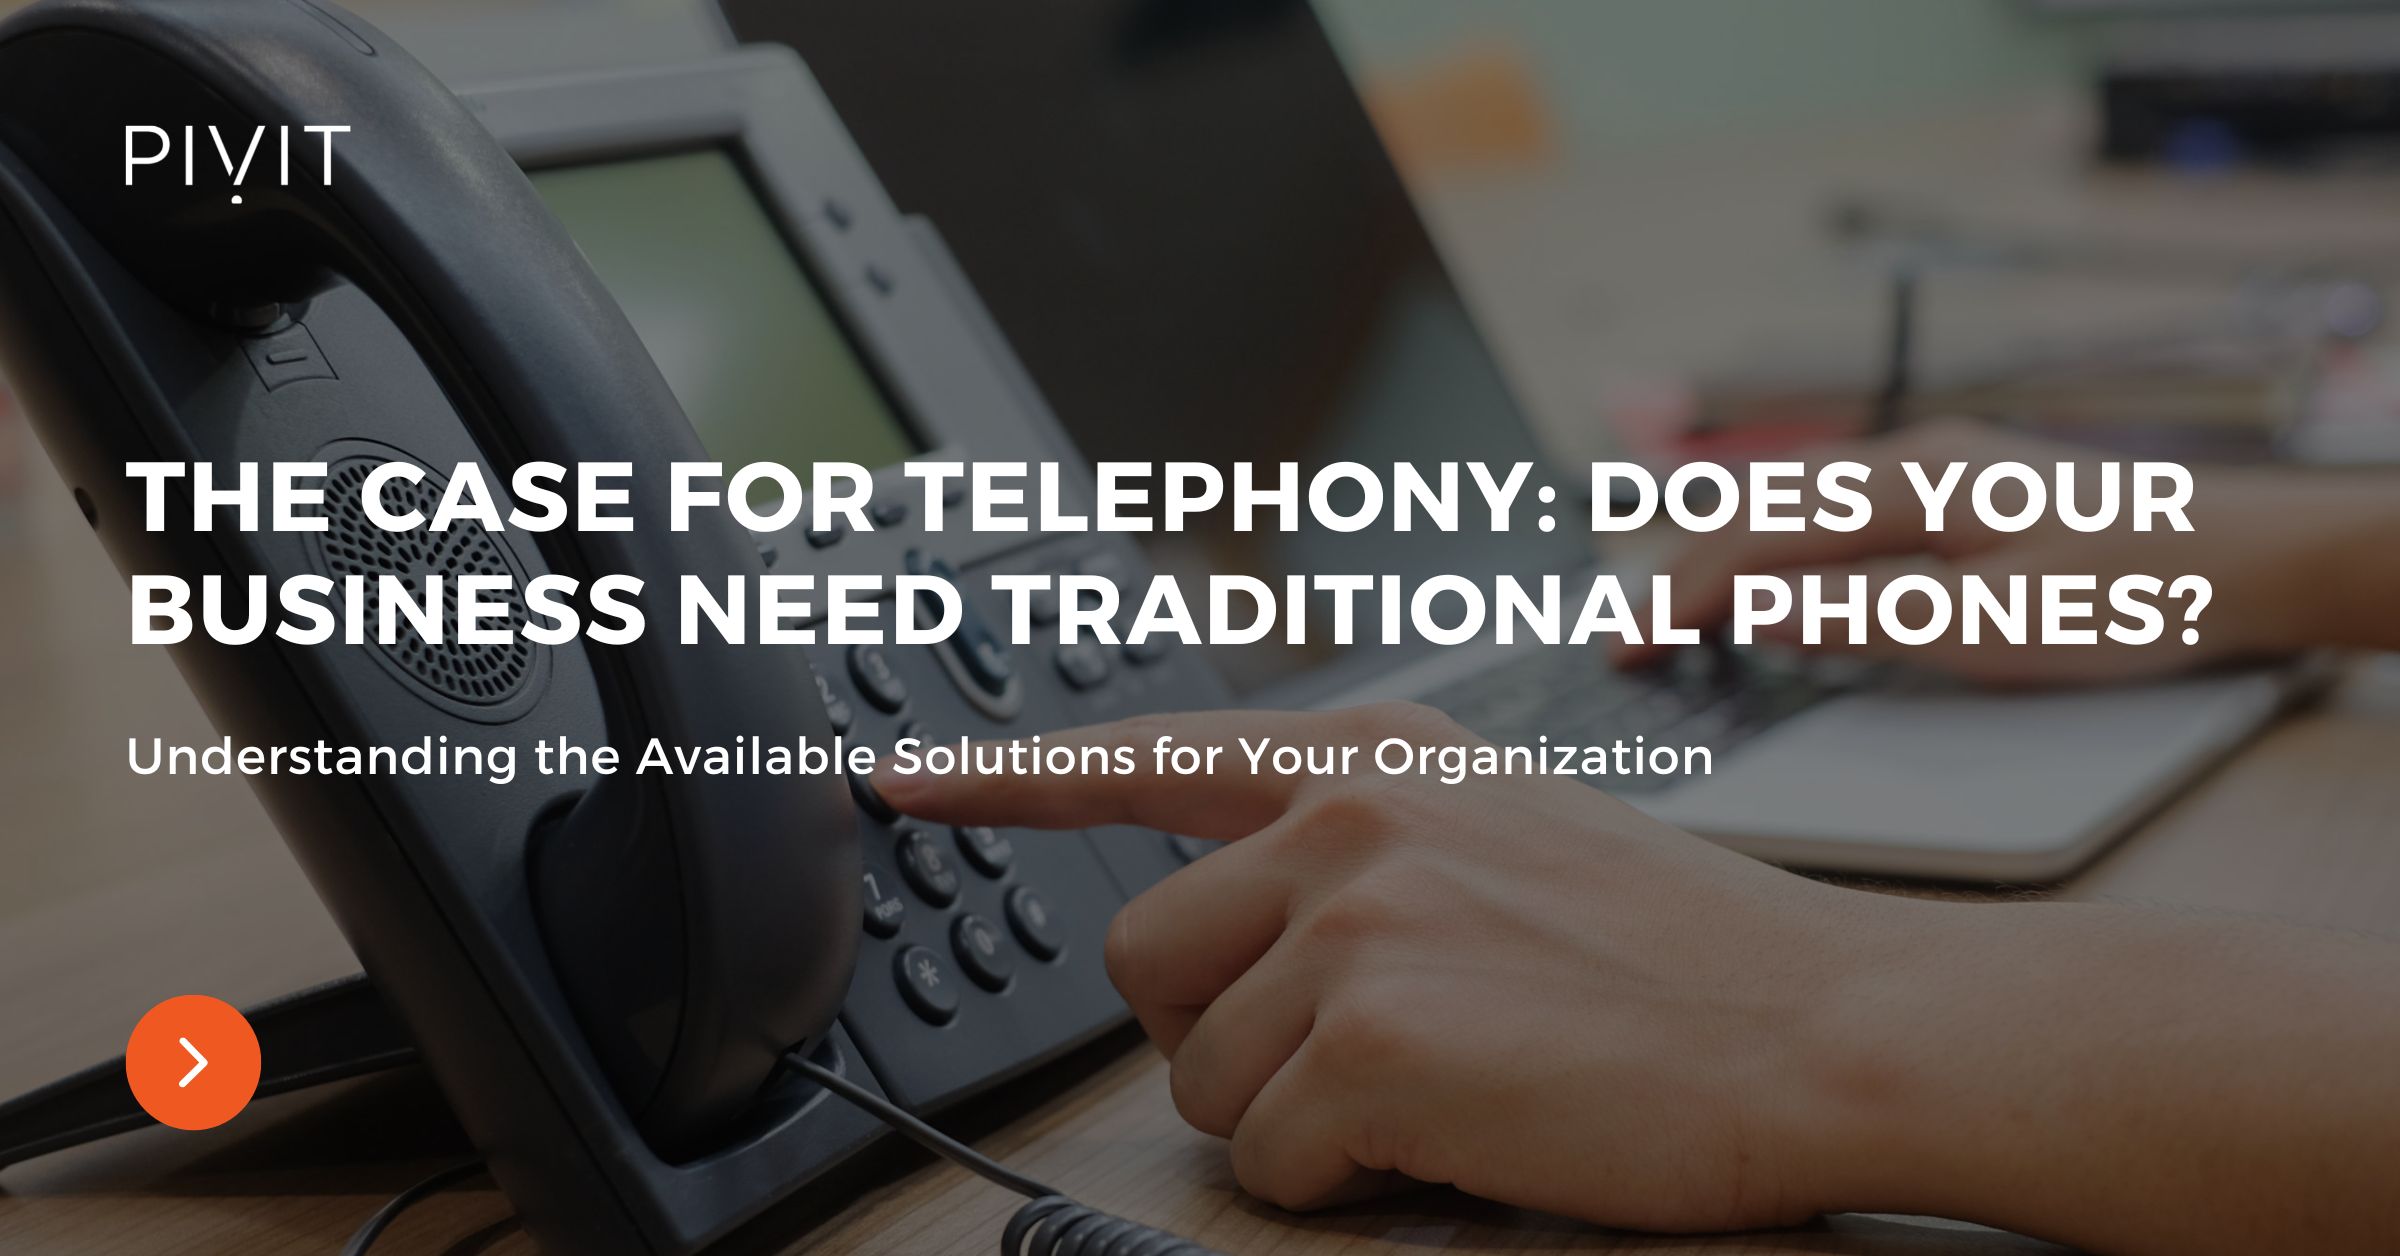 The Case for Telephony: Does Your Business Need Traditional Phones